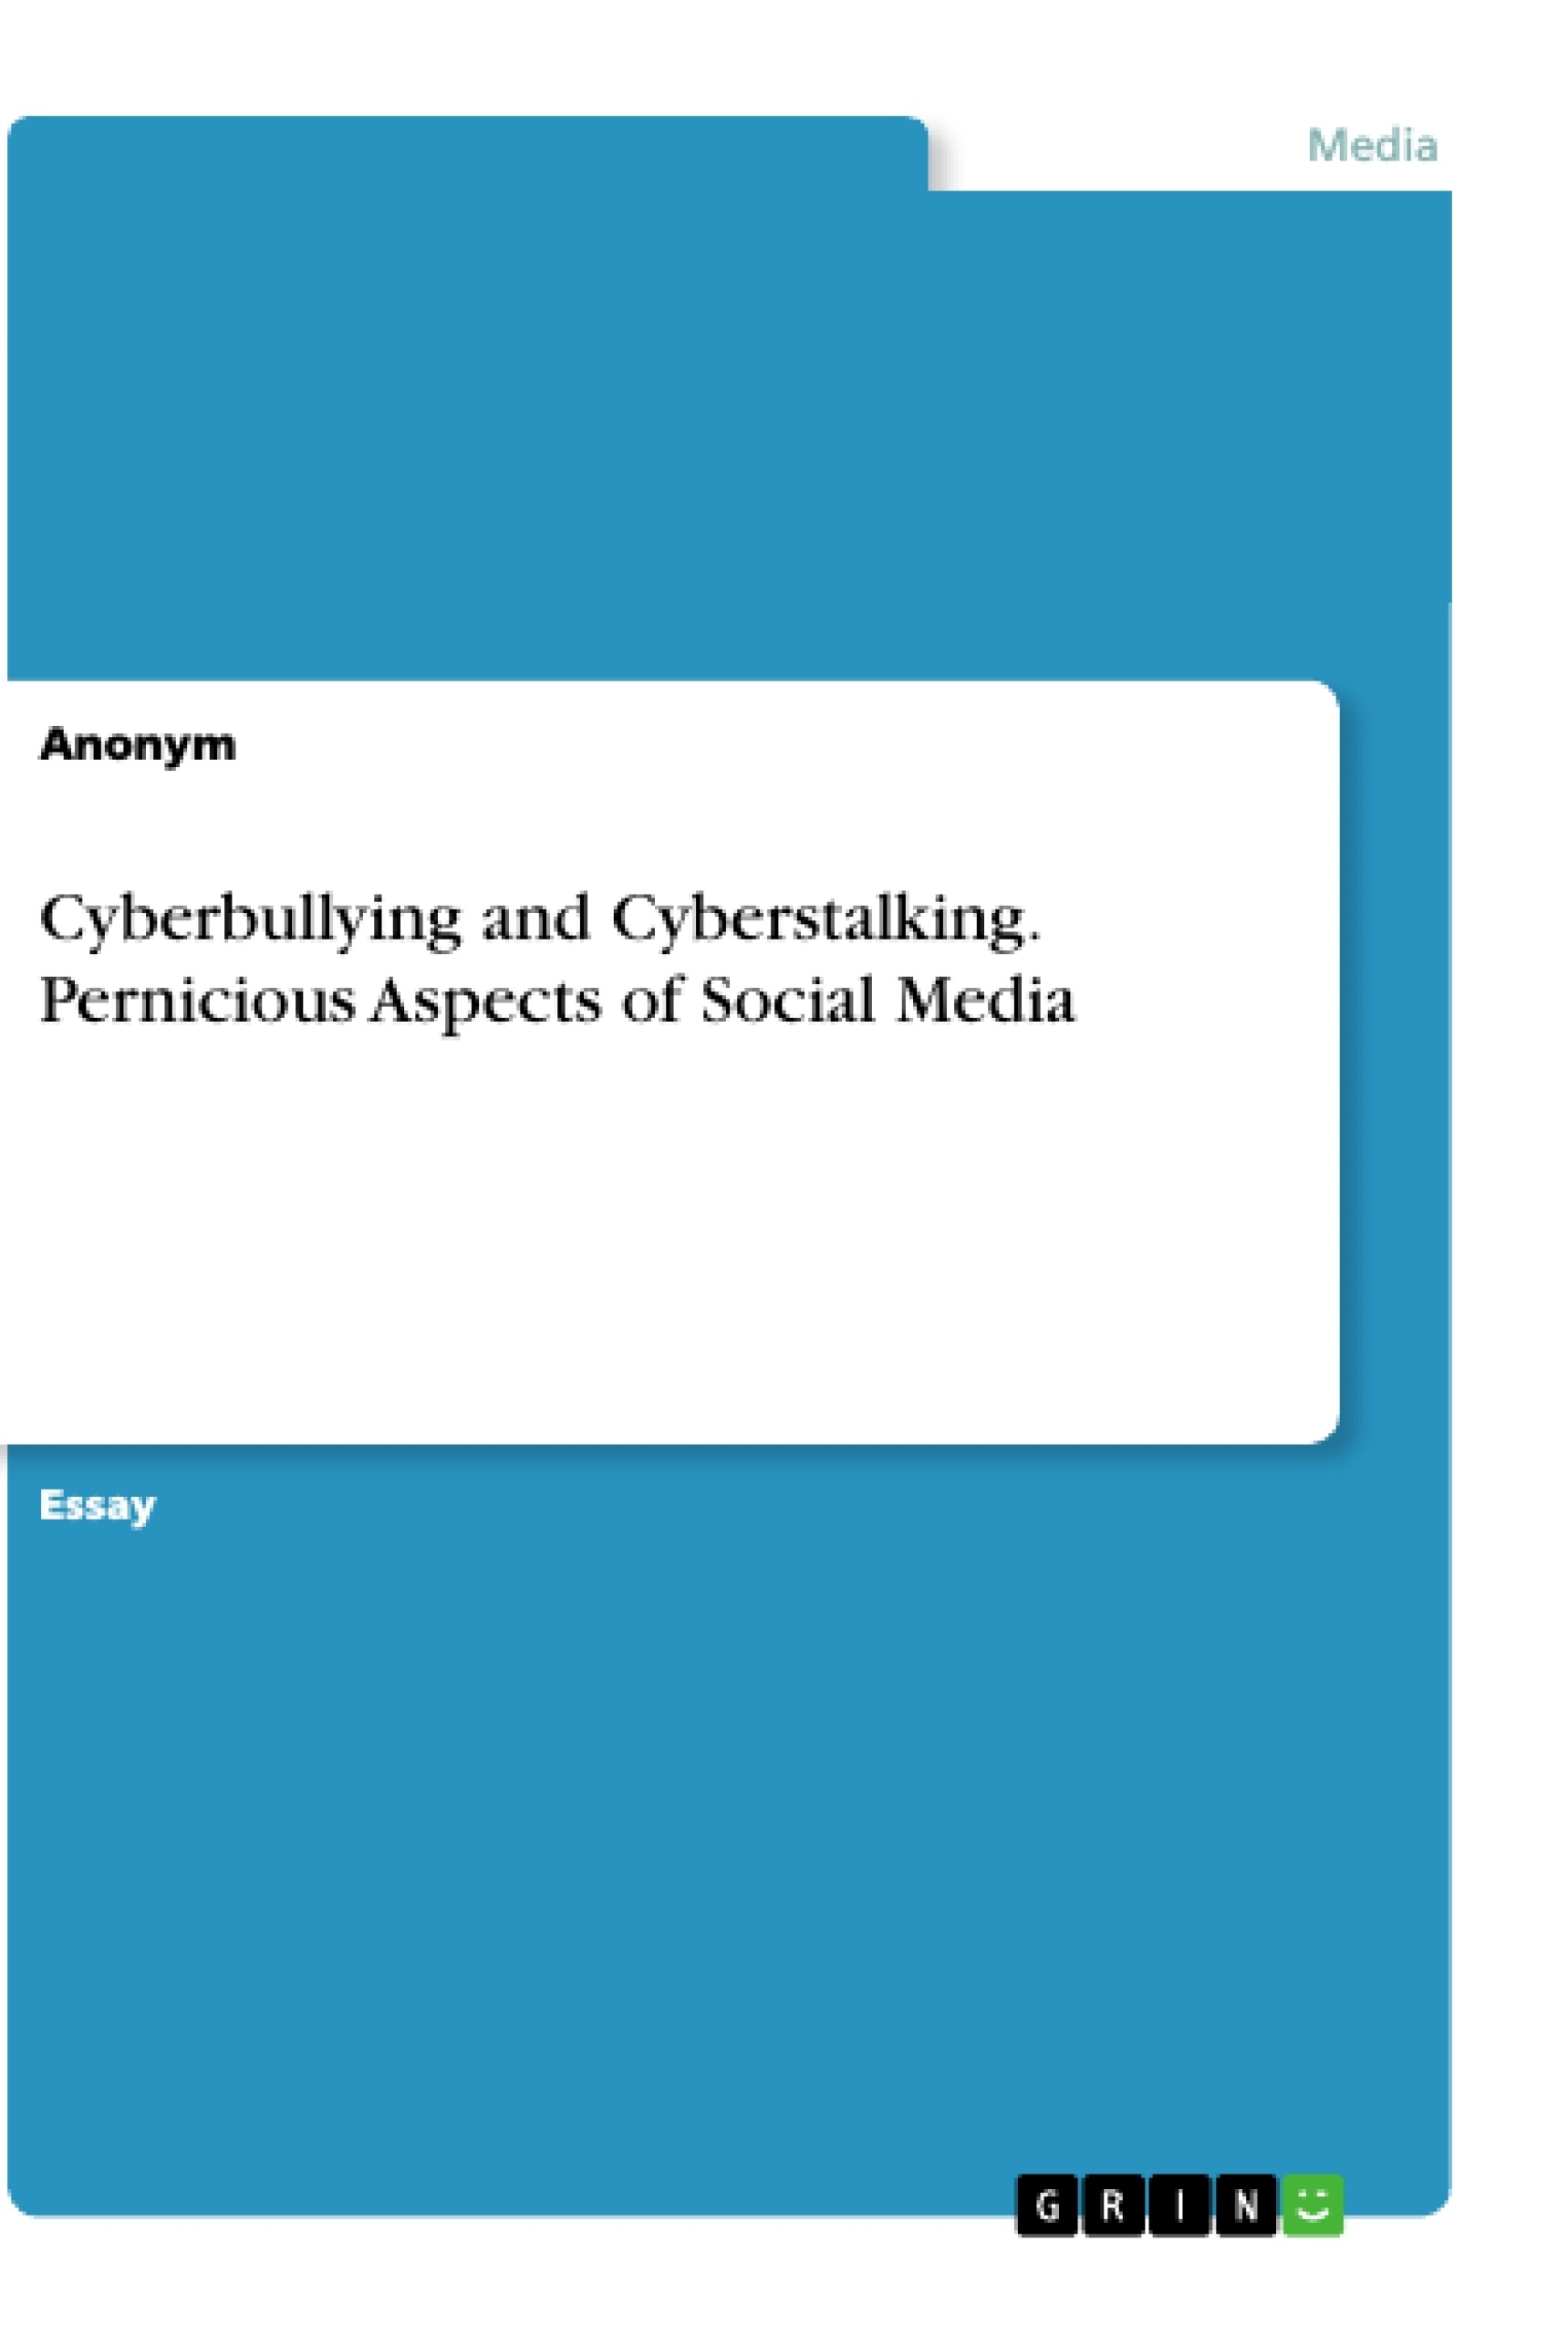 Titre: Cyberbullying and Cyberstalking. Pernicious Aspects of Social Media